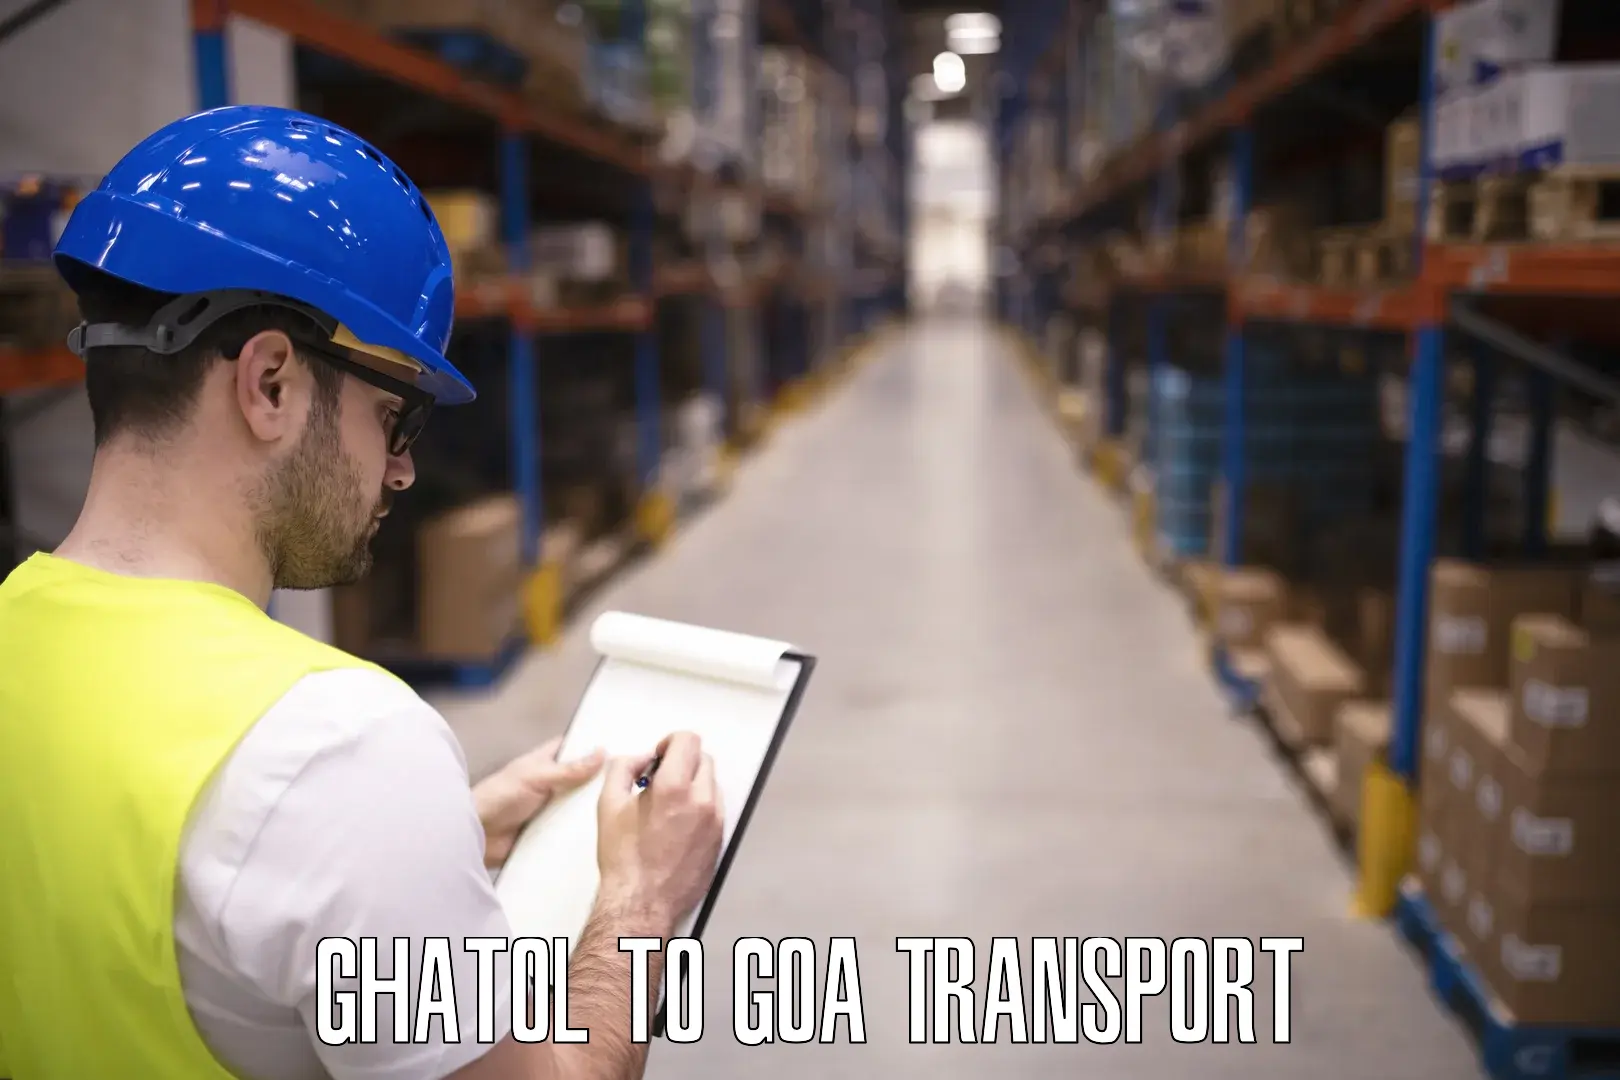 Transport shared services Ghatol to Bardez